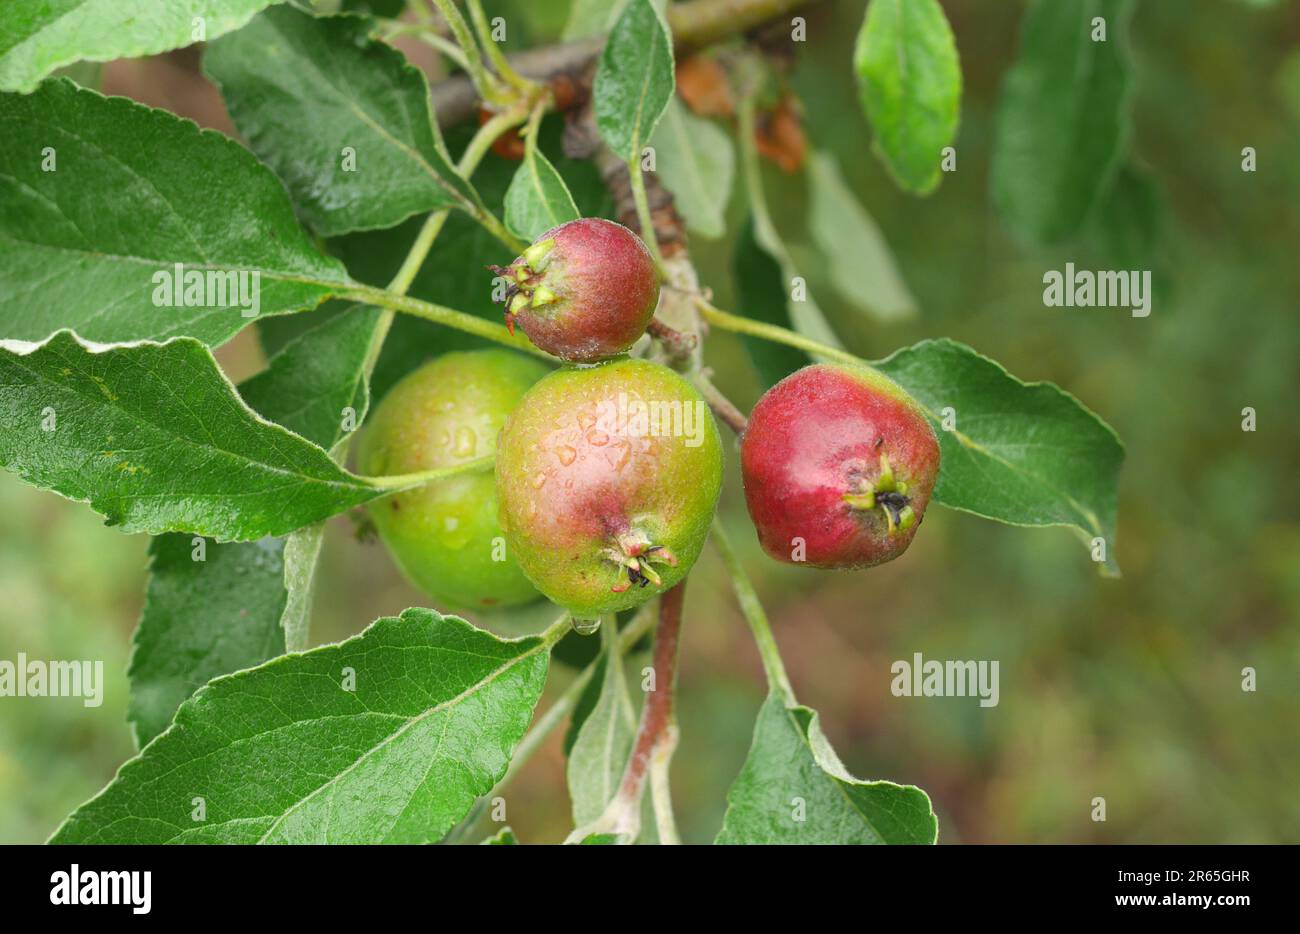 Apples ripening on a tree in June. The small apple will fall from the tree. This is known as June drop. Szigethalom, Hungary Stock Photo